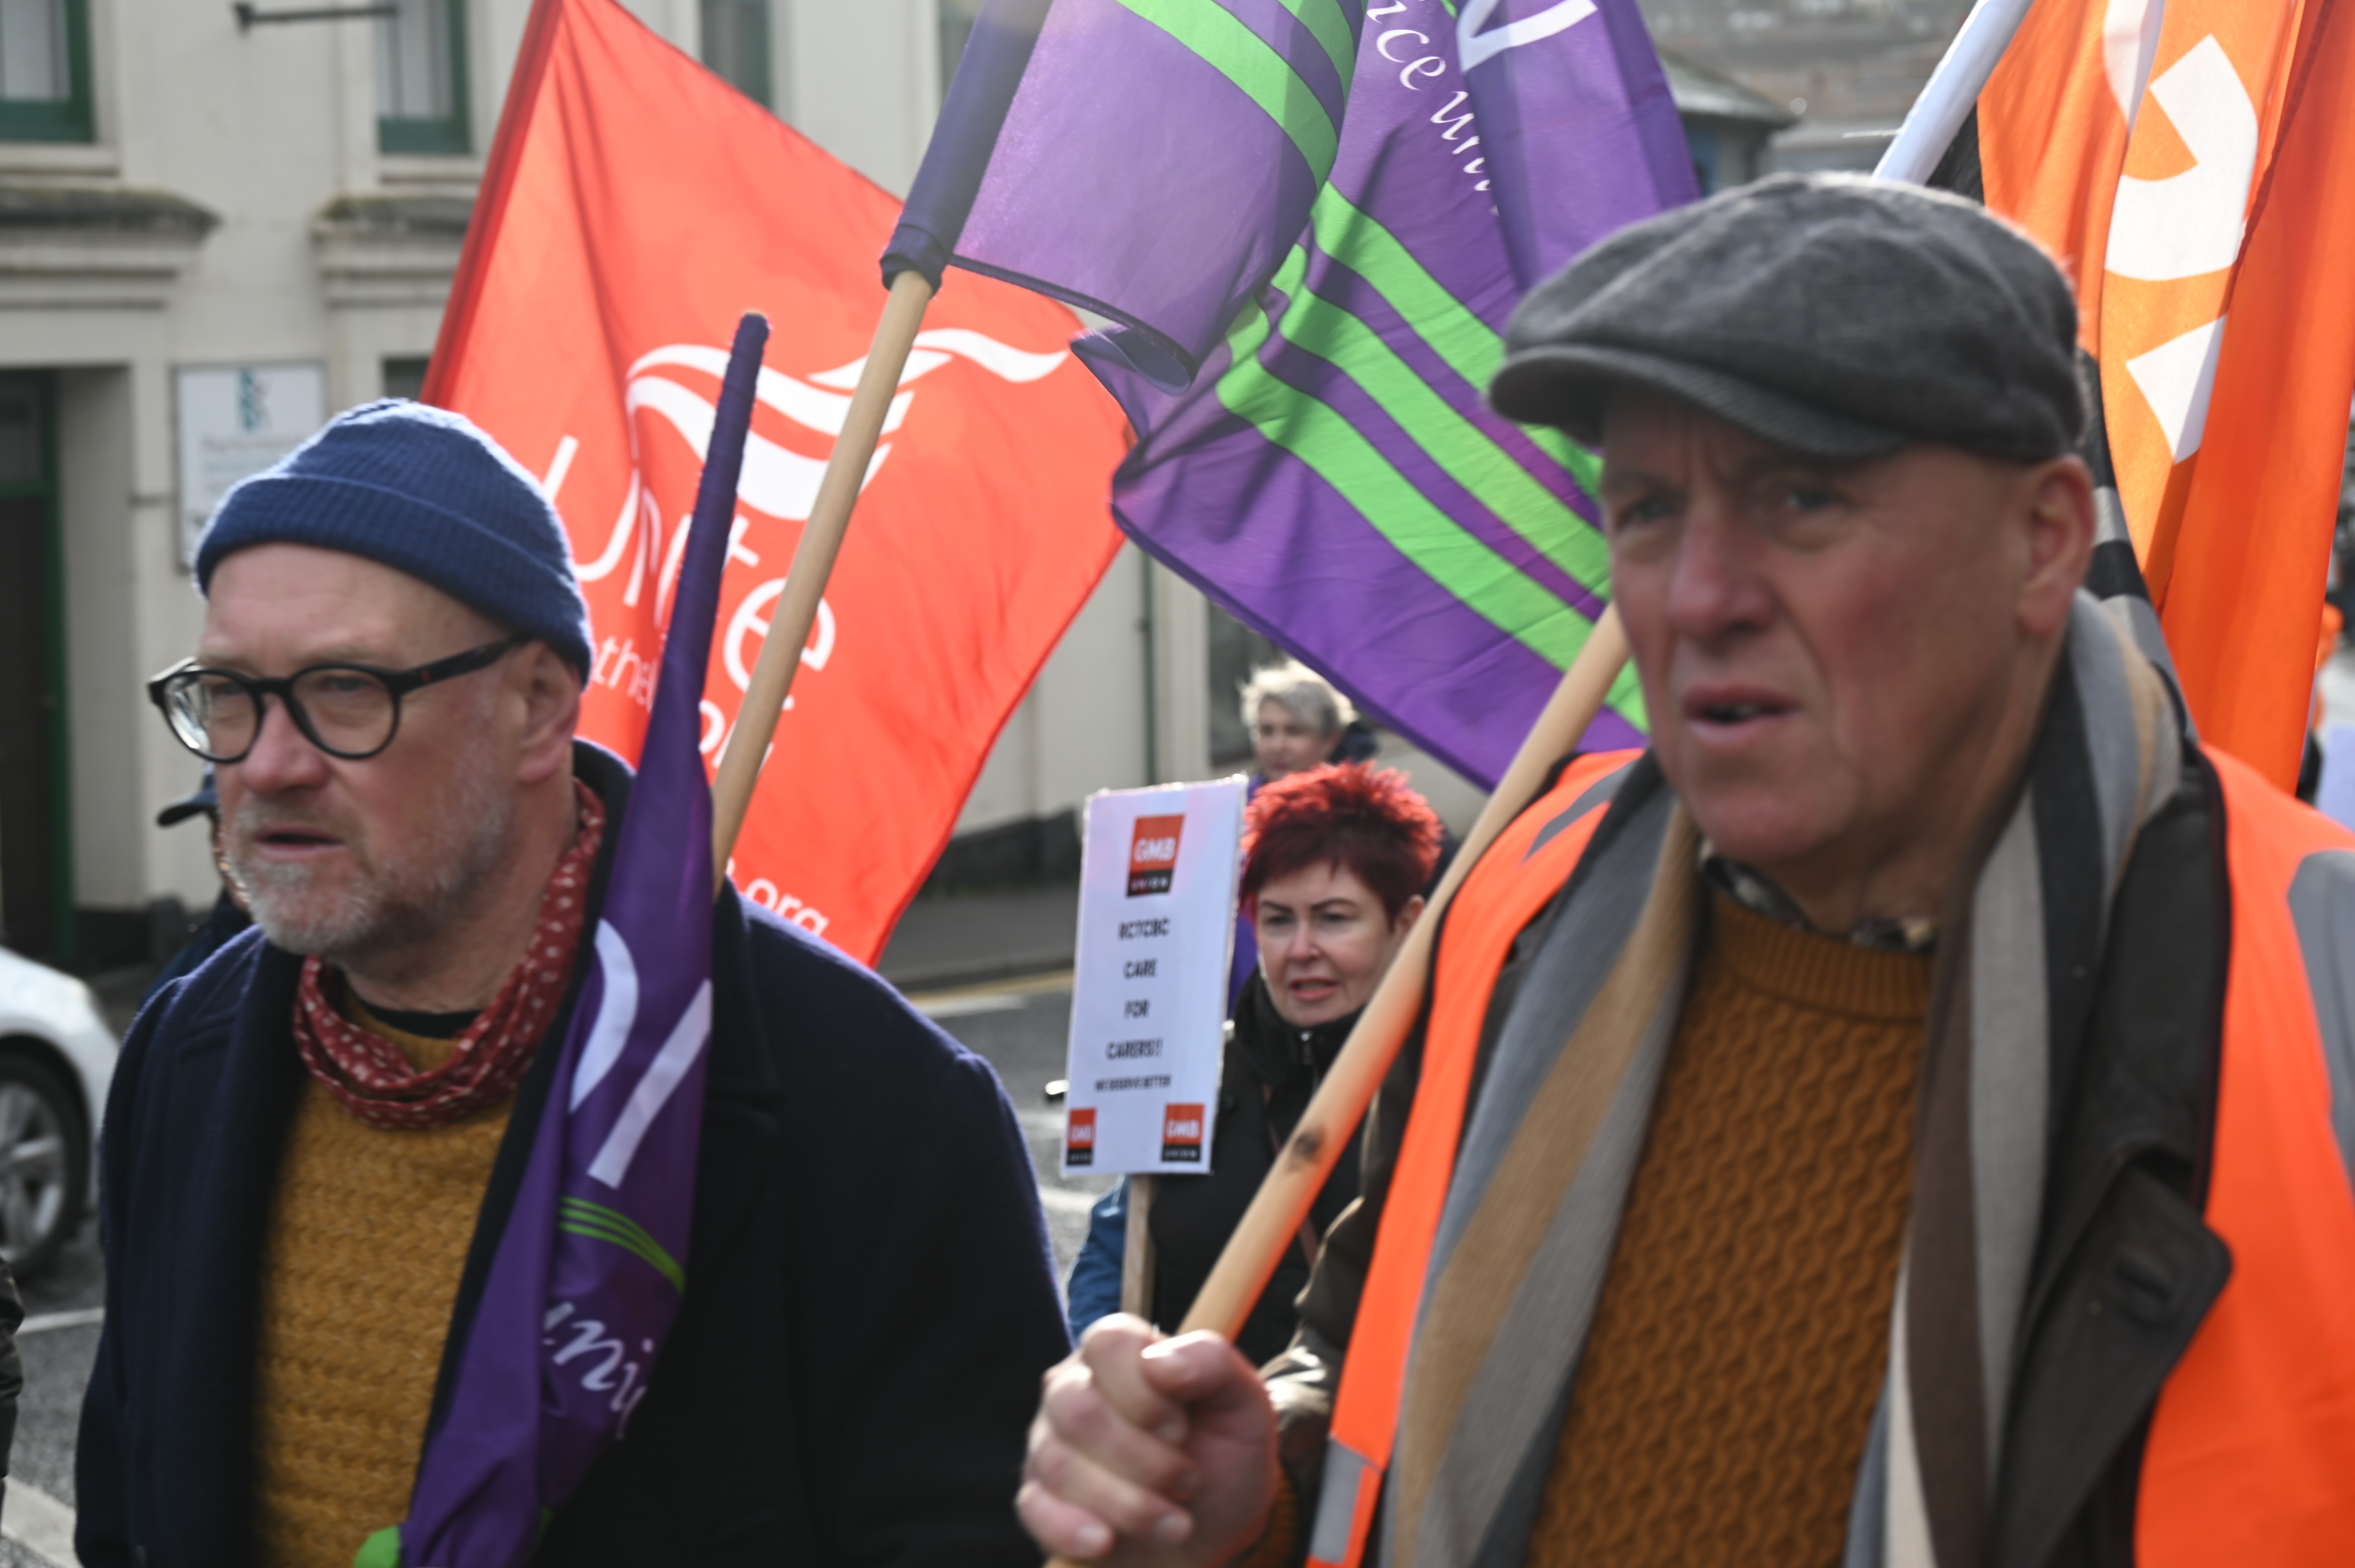 Mark Turner, UNISON, side by side with Gareth Morgan of GMB